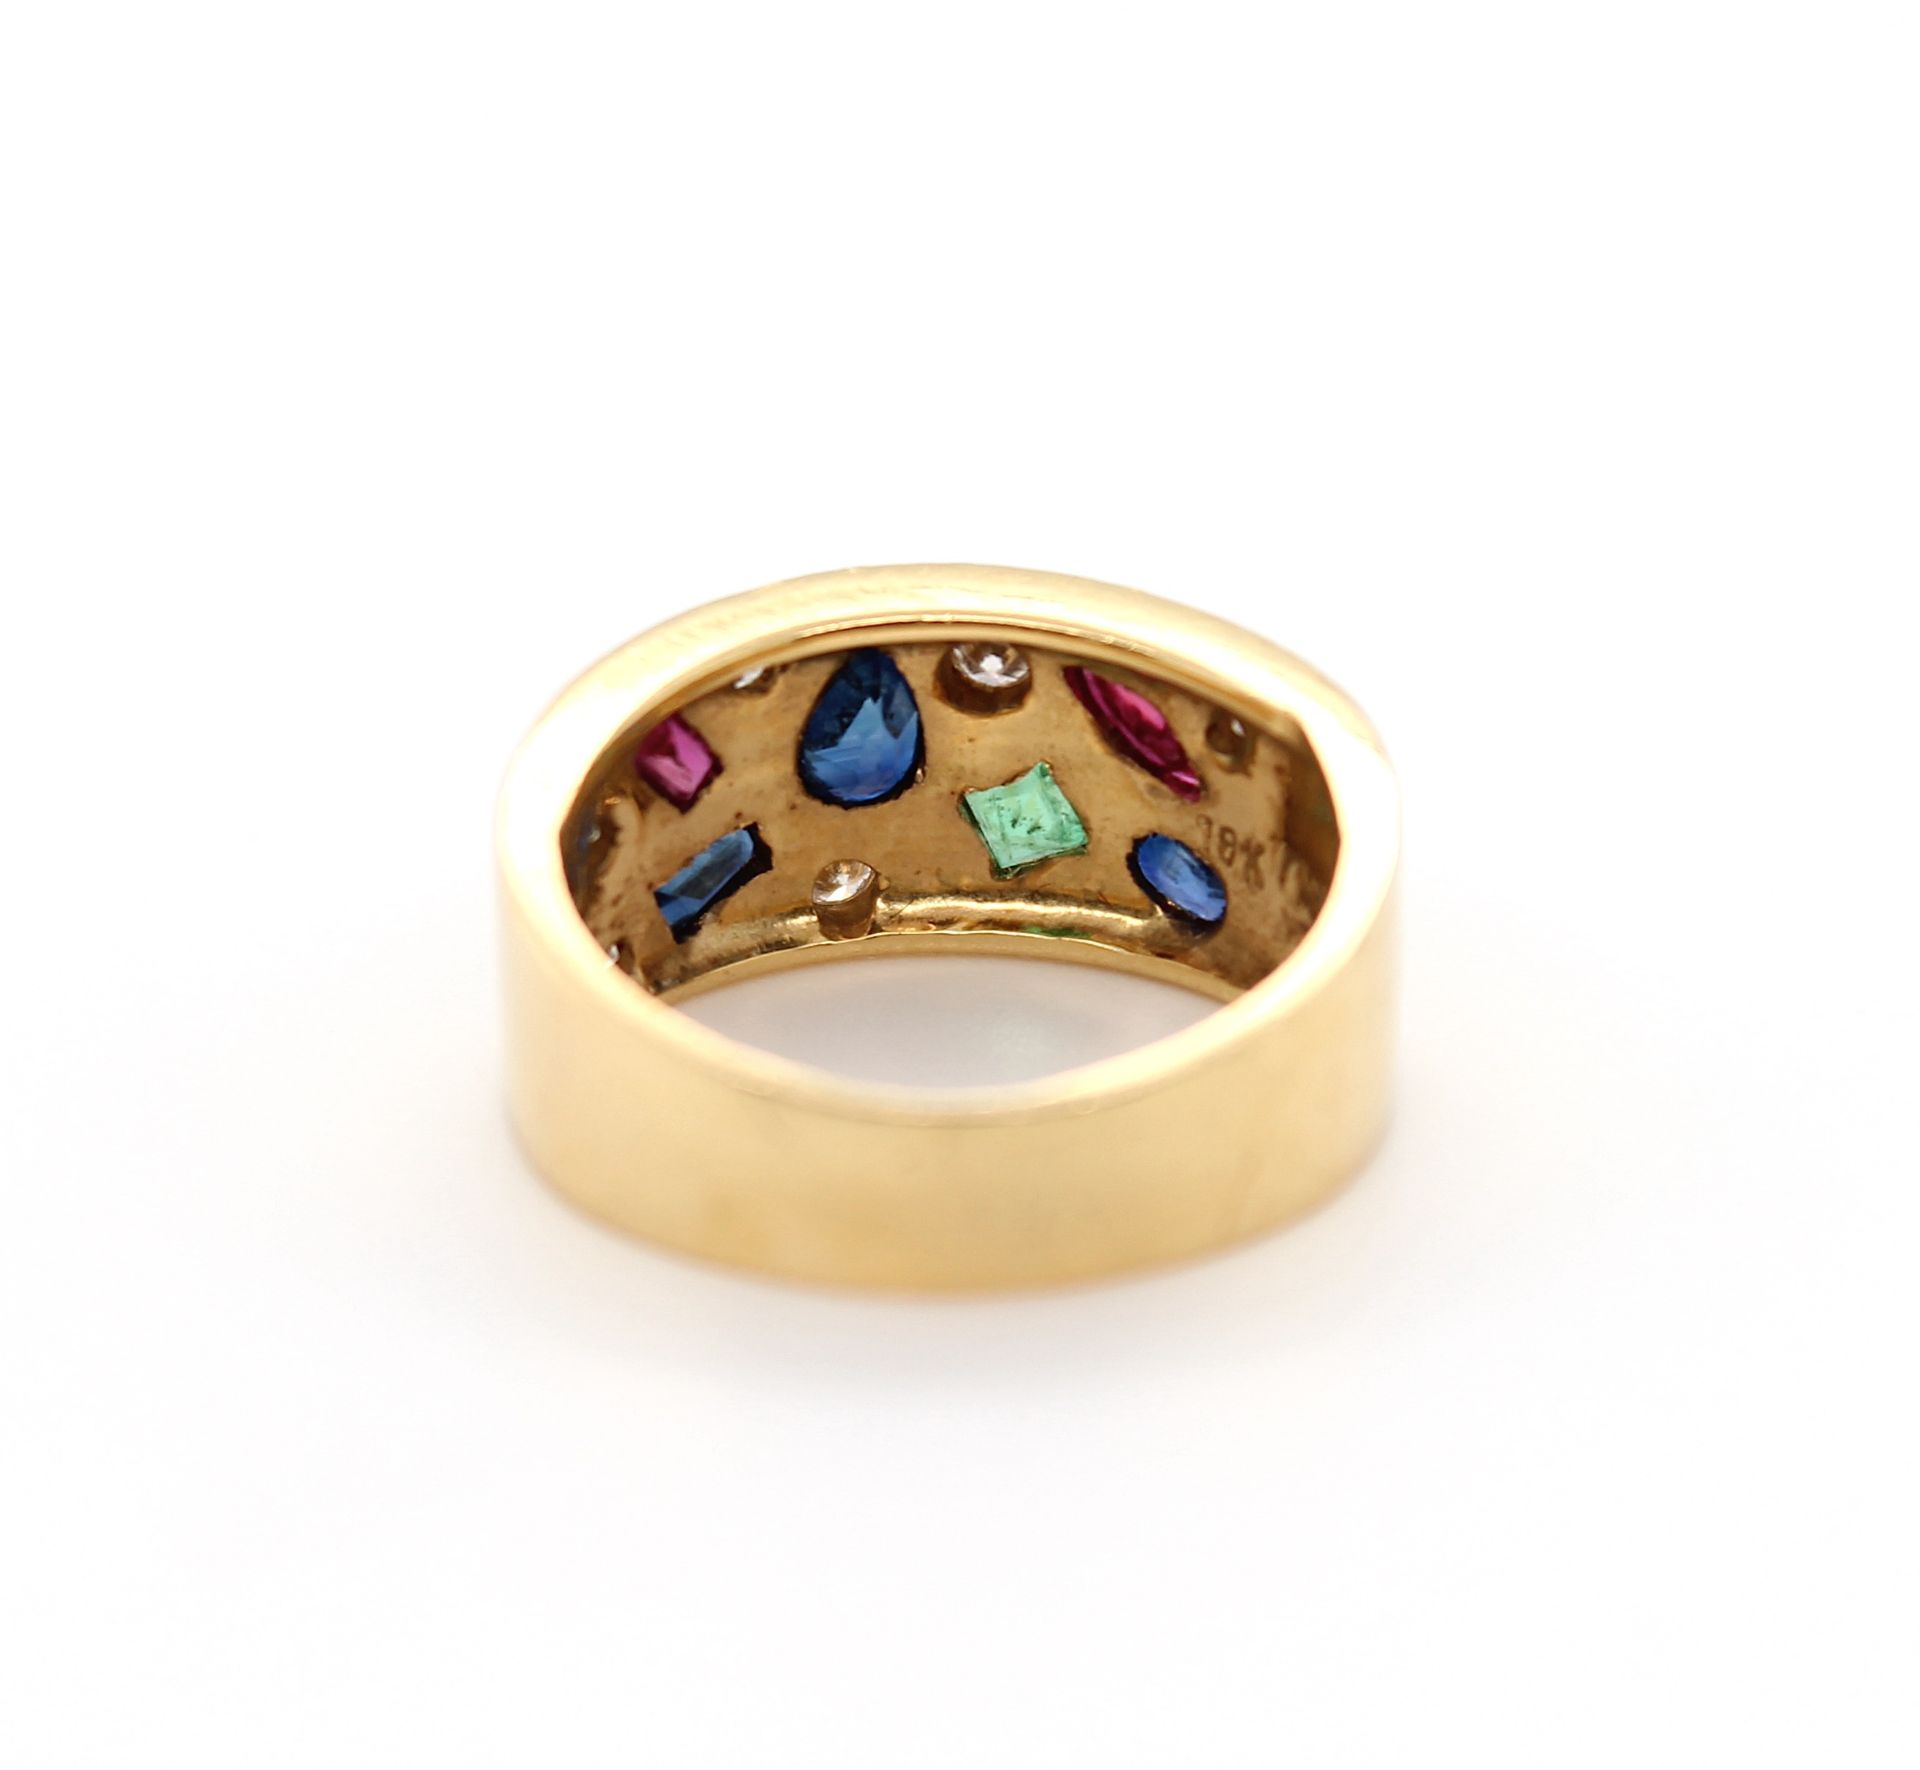 Ring with sapphires, rubies, emerald and brilliants - Image 4 of 4